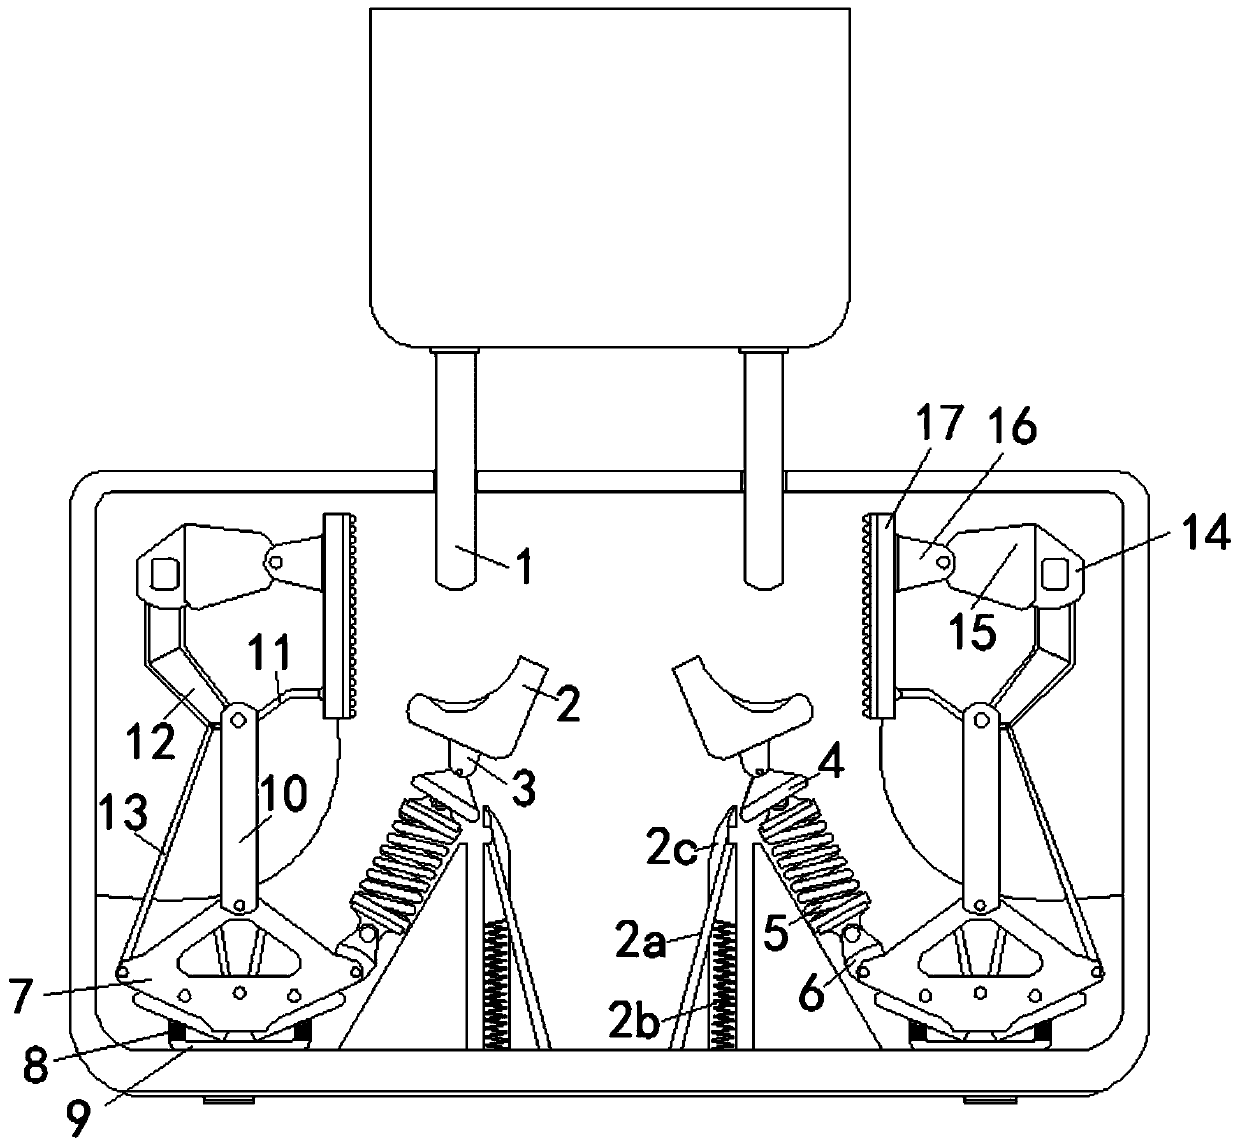 Socket jack head capable of automatically powering off